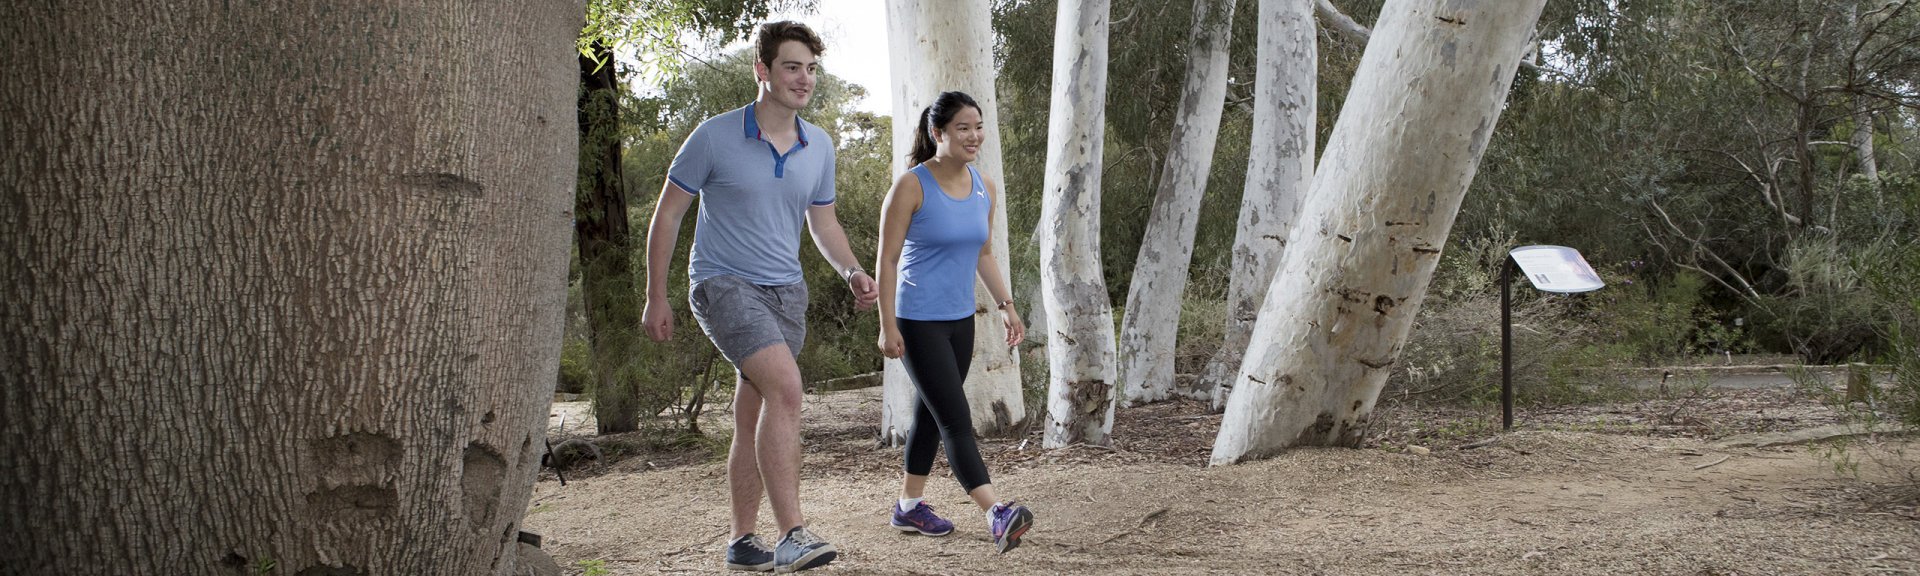 Visitors get moving along the Eucalypt Discovery Walk